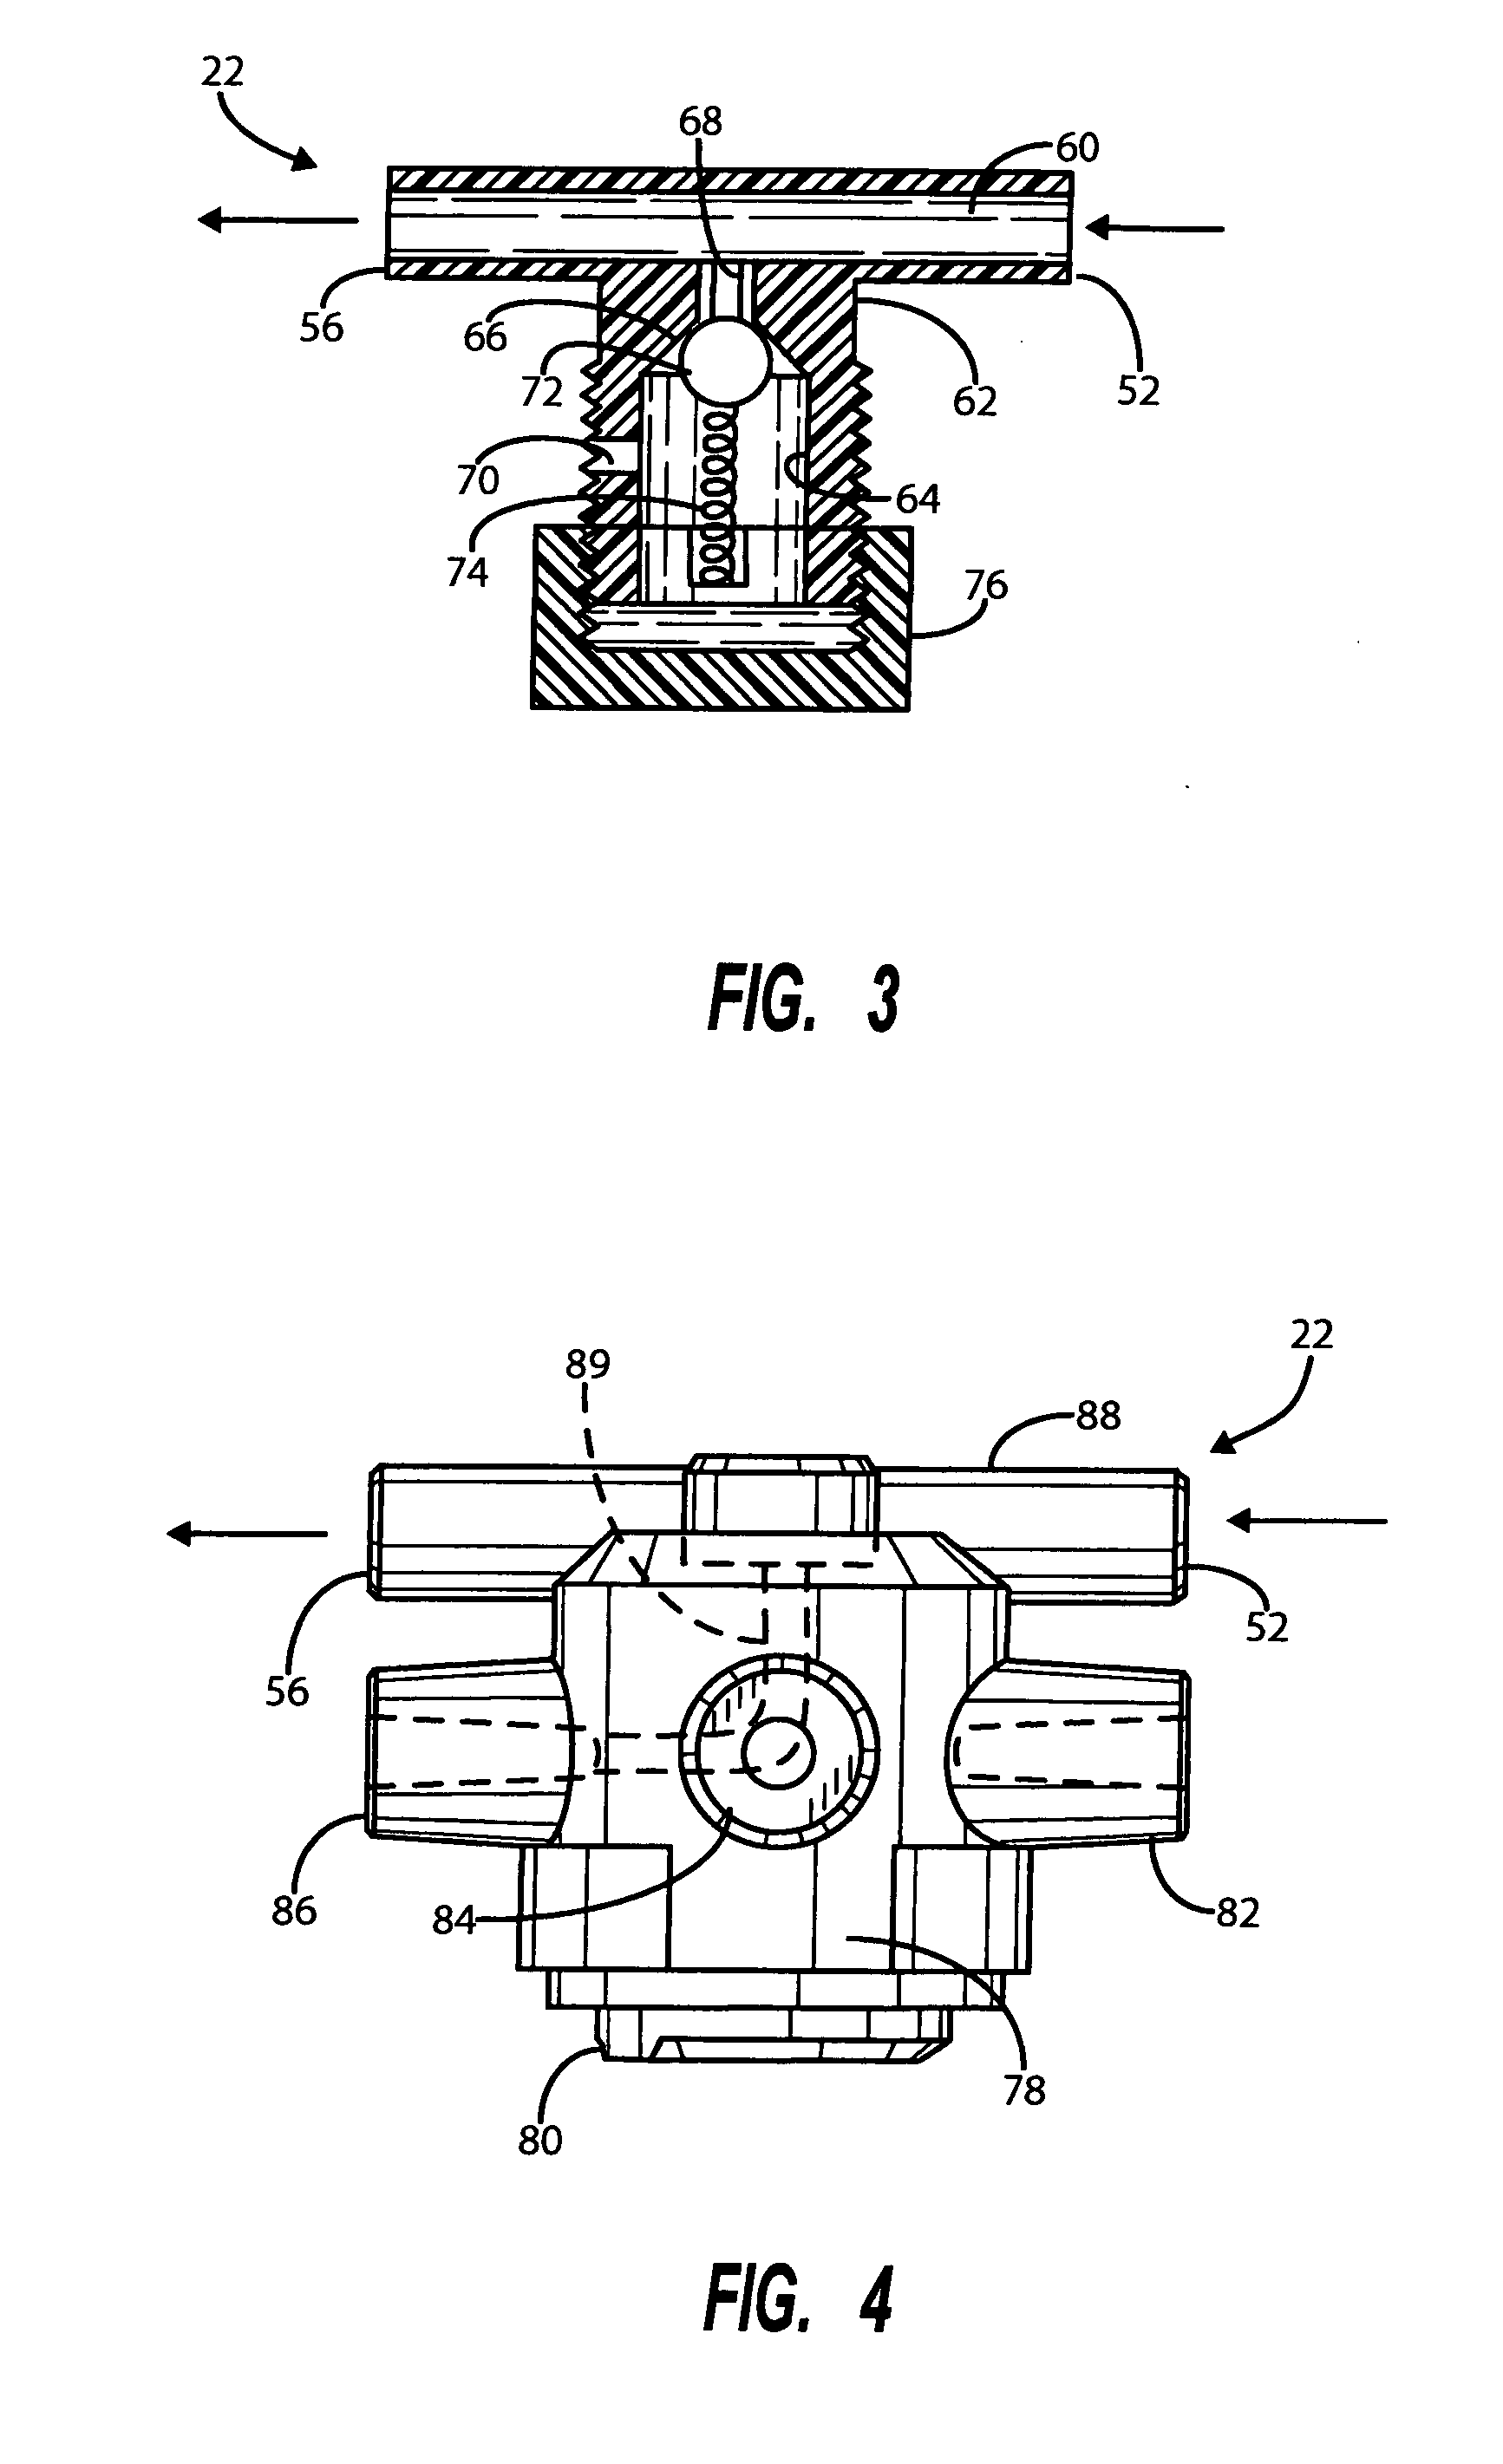 Middle ear pressure equalizing device with improved pressure control